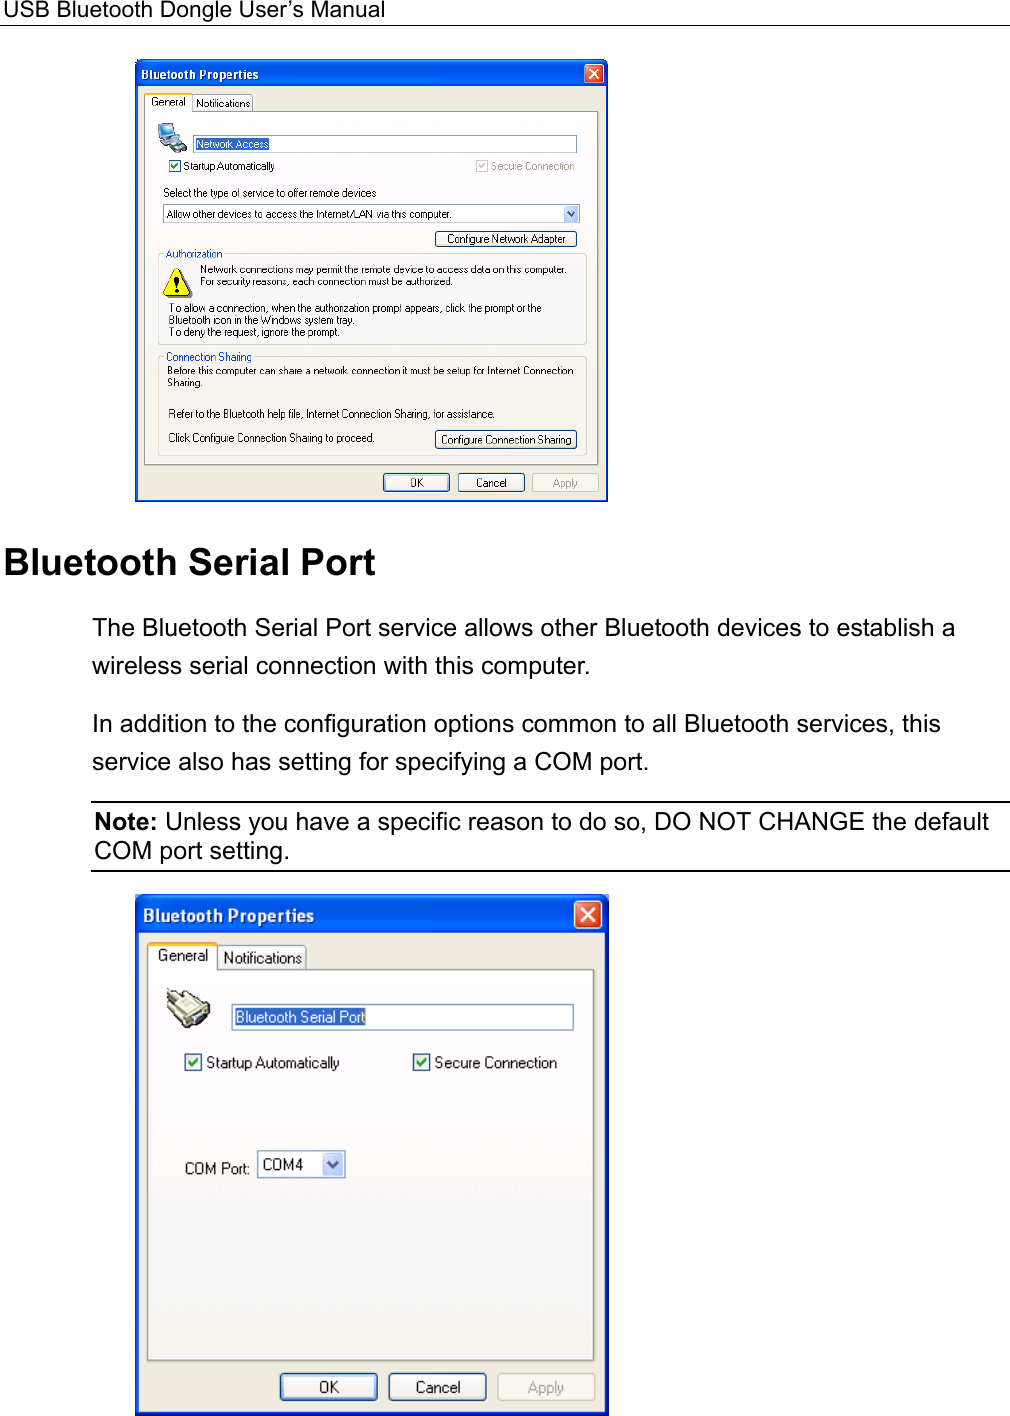 USB Bluetooth Dongle User’s Manual   Bluetooth Serial Port The Bluetooth Serial Port service allows other Bluetooth devices to establish a wireless serial connection with this computer.   In addition to the configuration options common to all Bluetooth services, this service also has setting for specifying a COM port.   Note: Unless you have a specific reason to do so, DO NOT CHANGE the default COM port setting.   